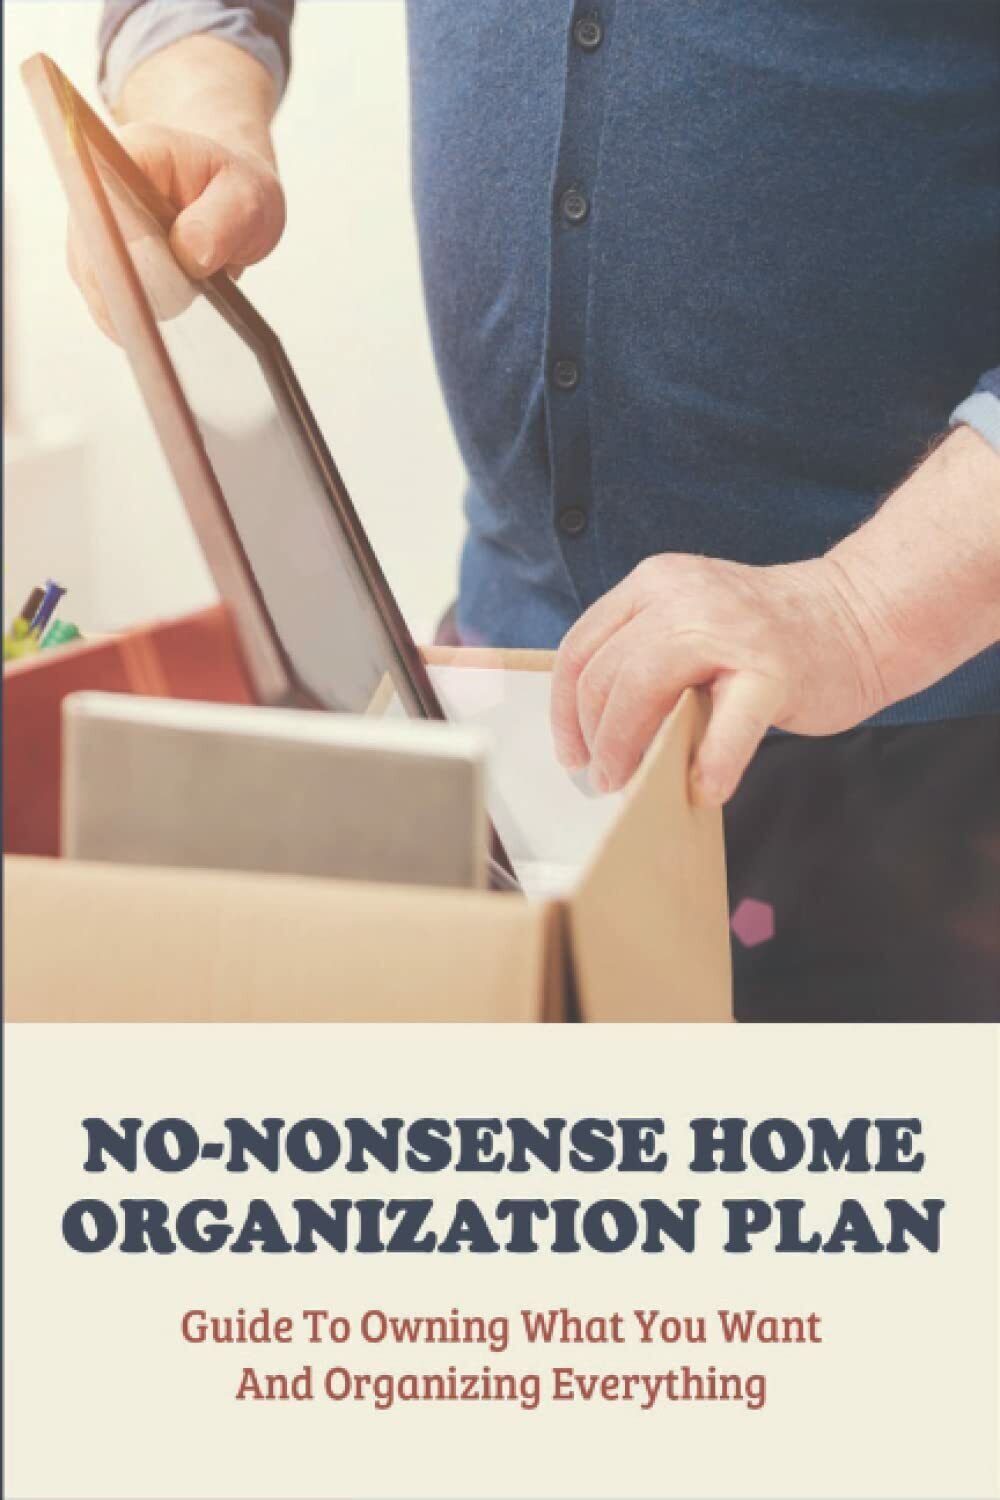 No-Nonsense Home Organization Plan: Guide To Owning What You Want And Organizing